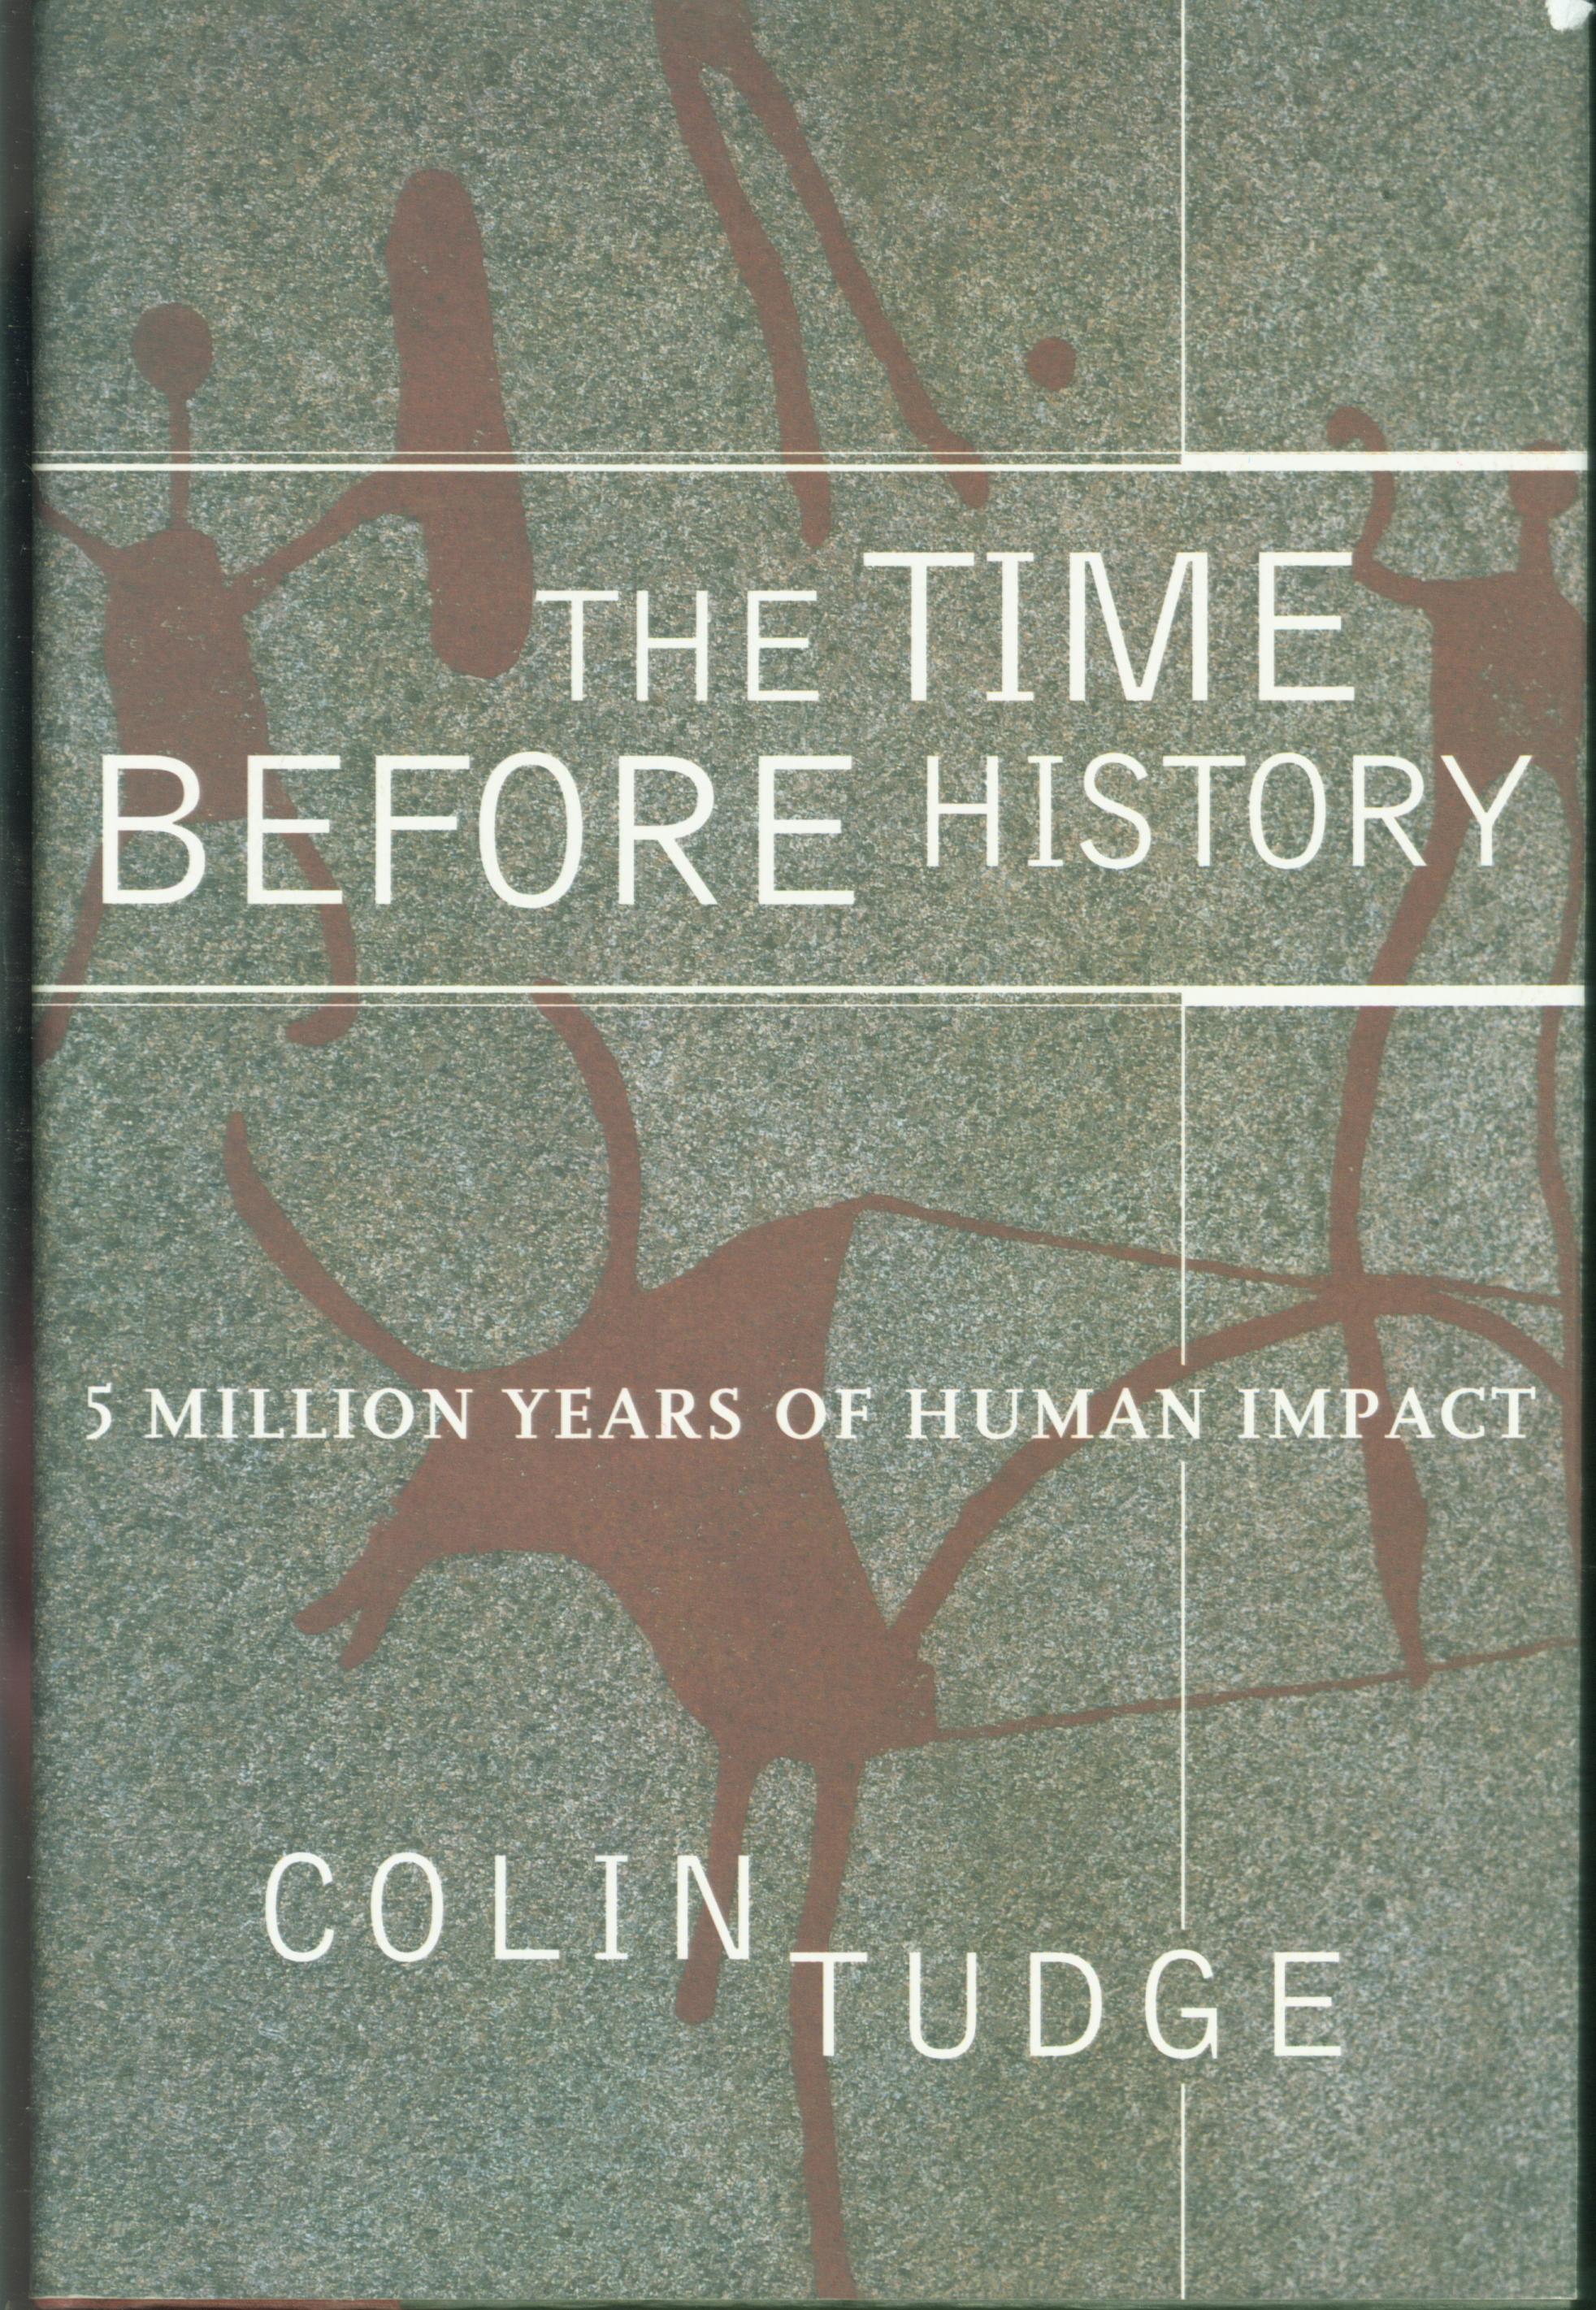 THE TIME BEFORE HISTORY: 5 million years of human impact. 